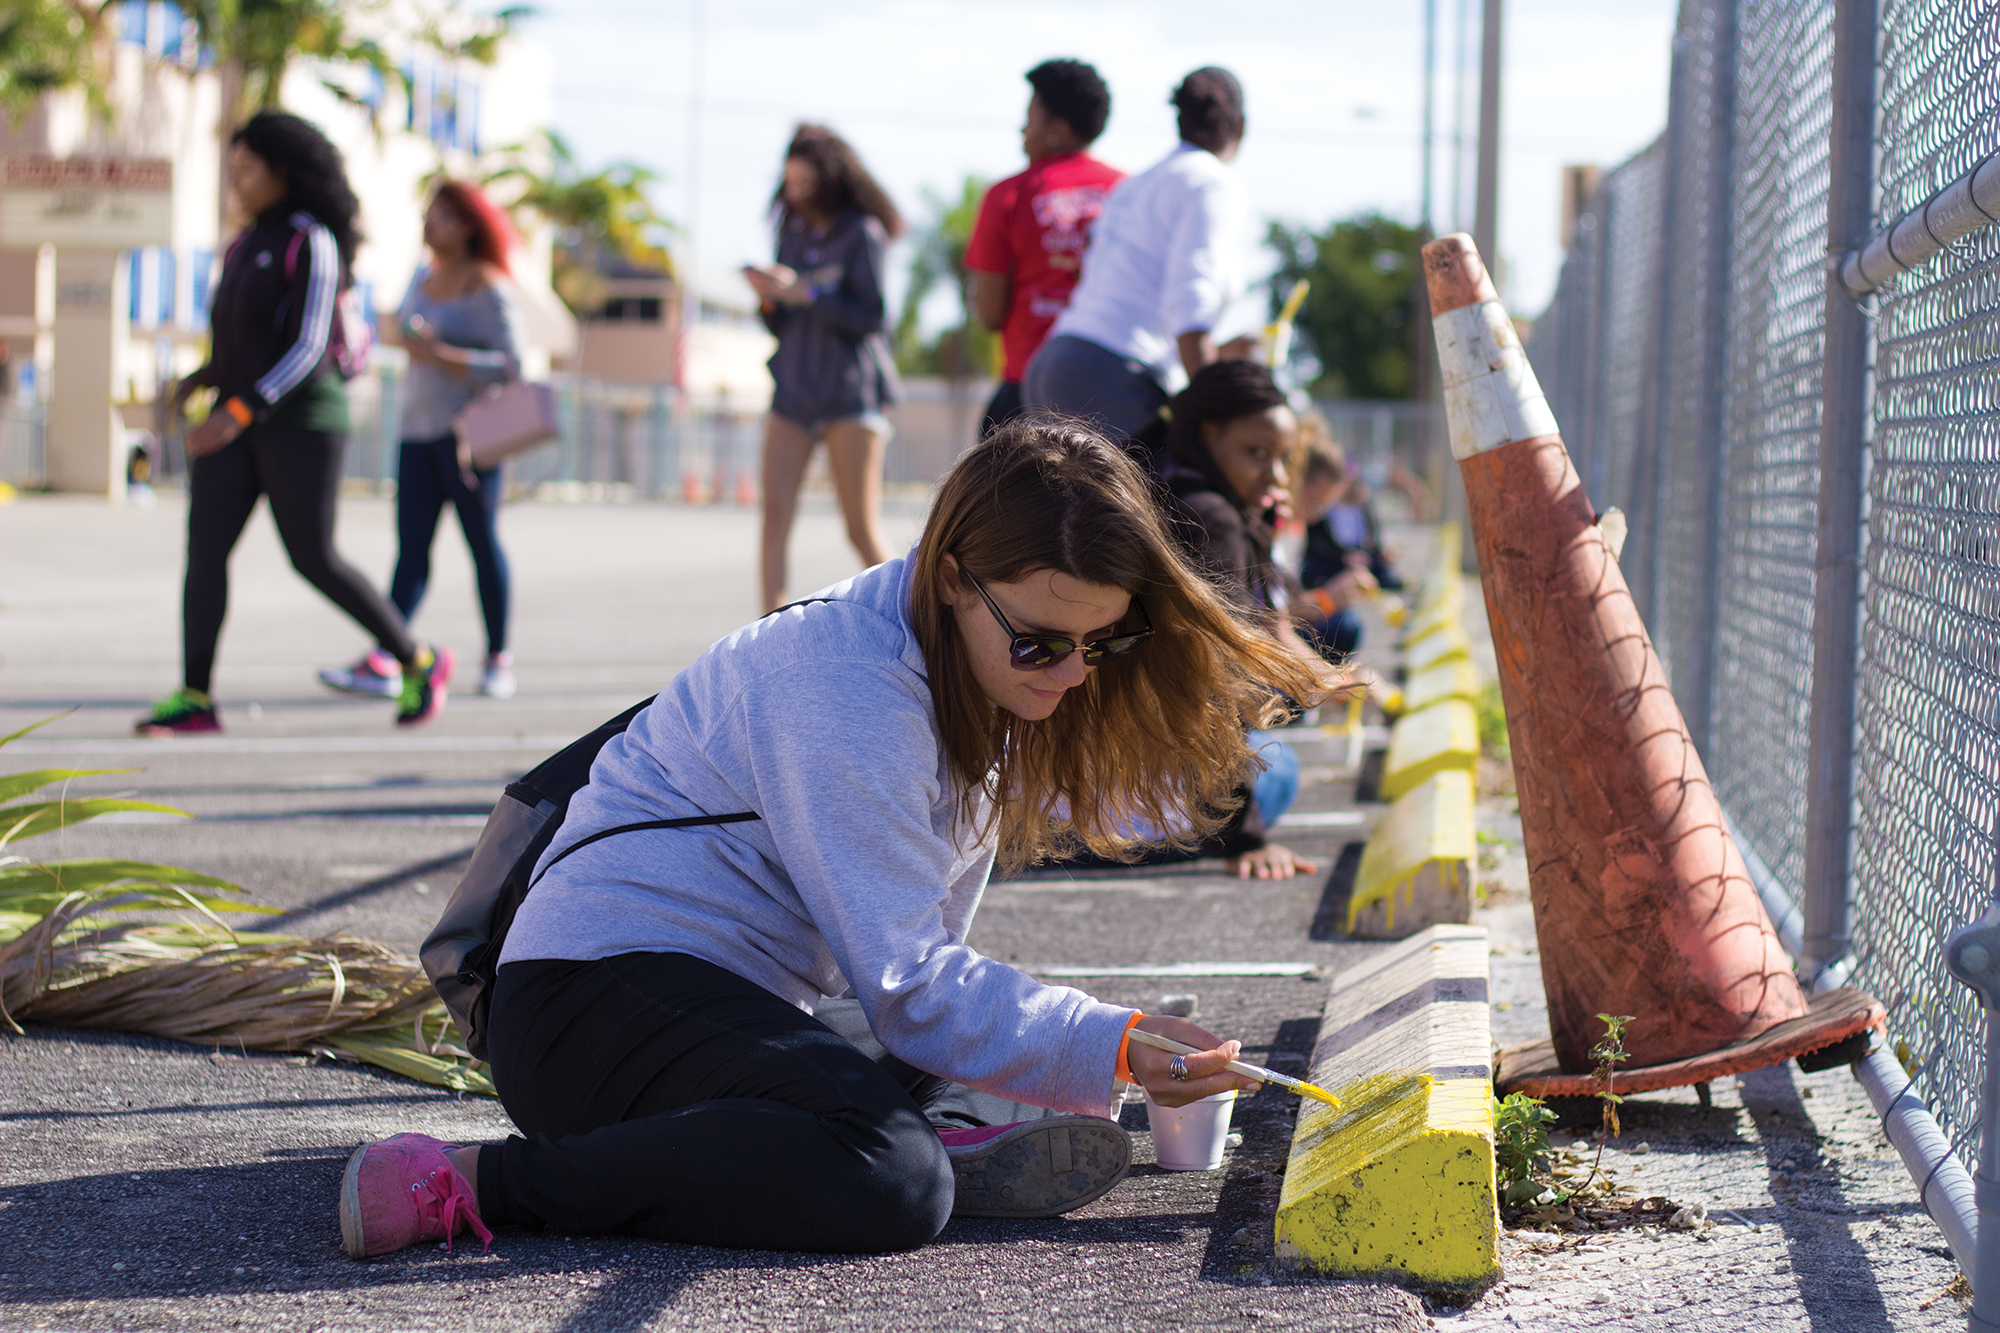 Freshman Tamara Popovska paints a parking spot alongside other students volunteering for the Martin Luther King Jr. Day of Service in Liberty City on Monday. The MLK Day of Service experienced a record turnout with nearly 150 student volunteers. UM partnered with the Miami Children’s Initiative to bring volunteers to elementary and middle schools in Liberty City, where the volunteers worked on beautifying the area. Some of the projects included painting, laying mulch and cleaning up. The volunteers also got to spend time playing sports with children from local neighborhoods. Kawan Amelung // Staff Photographer